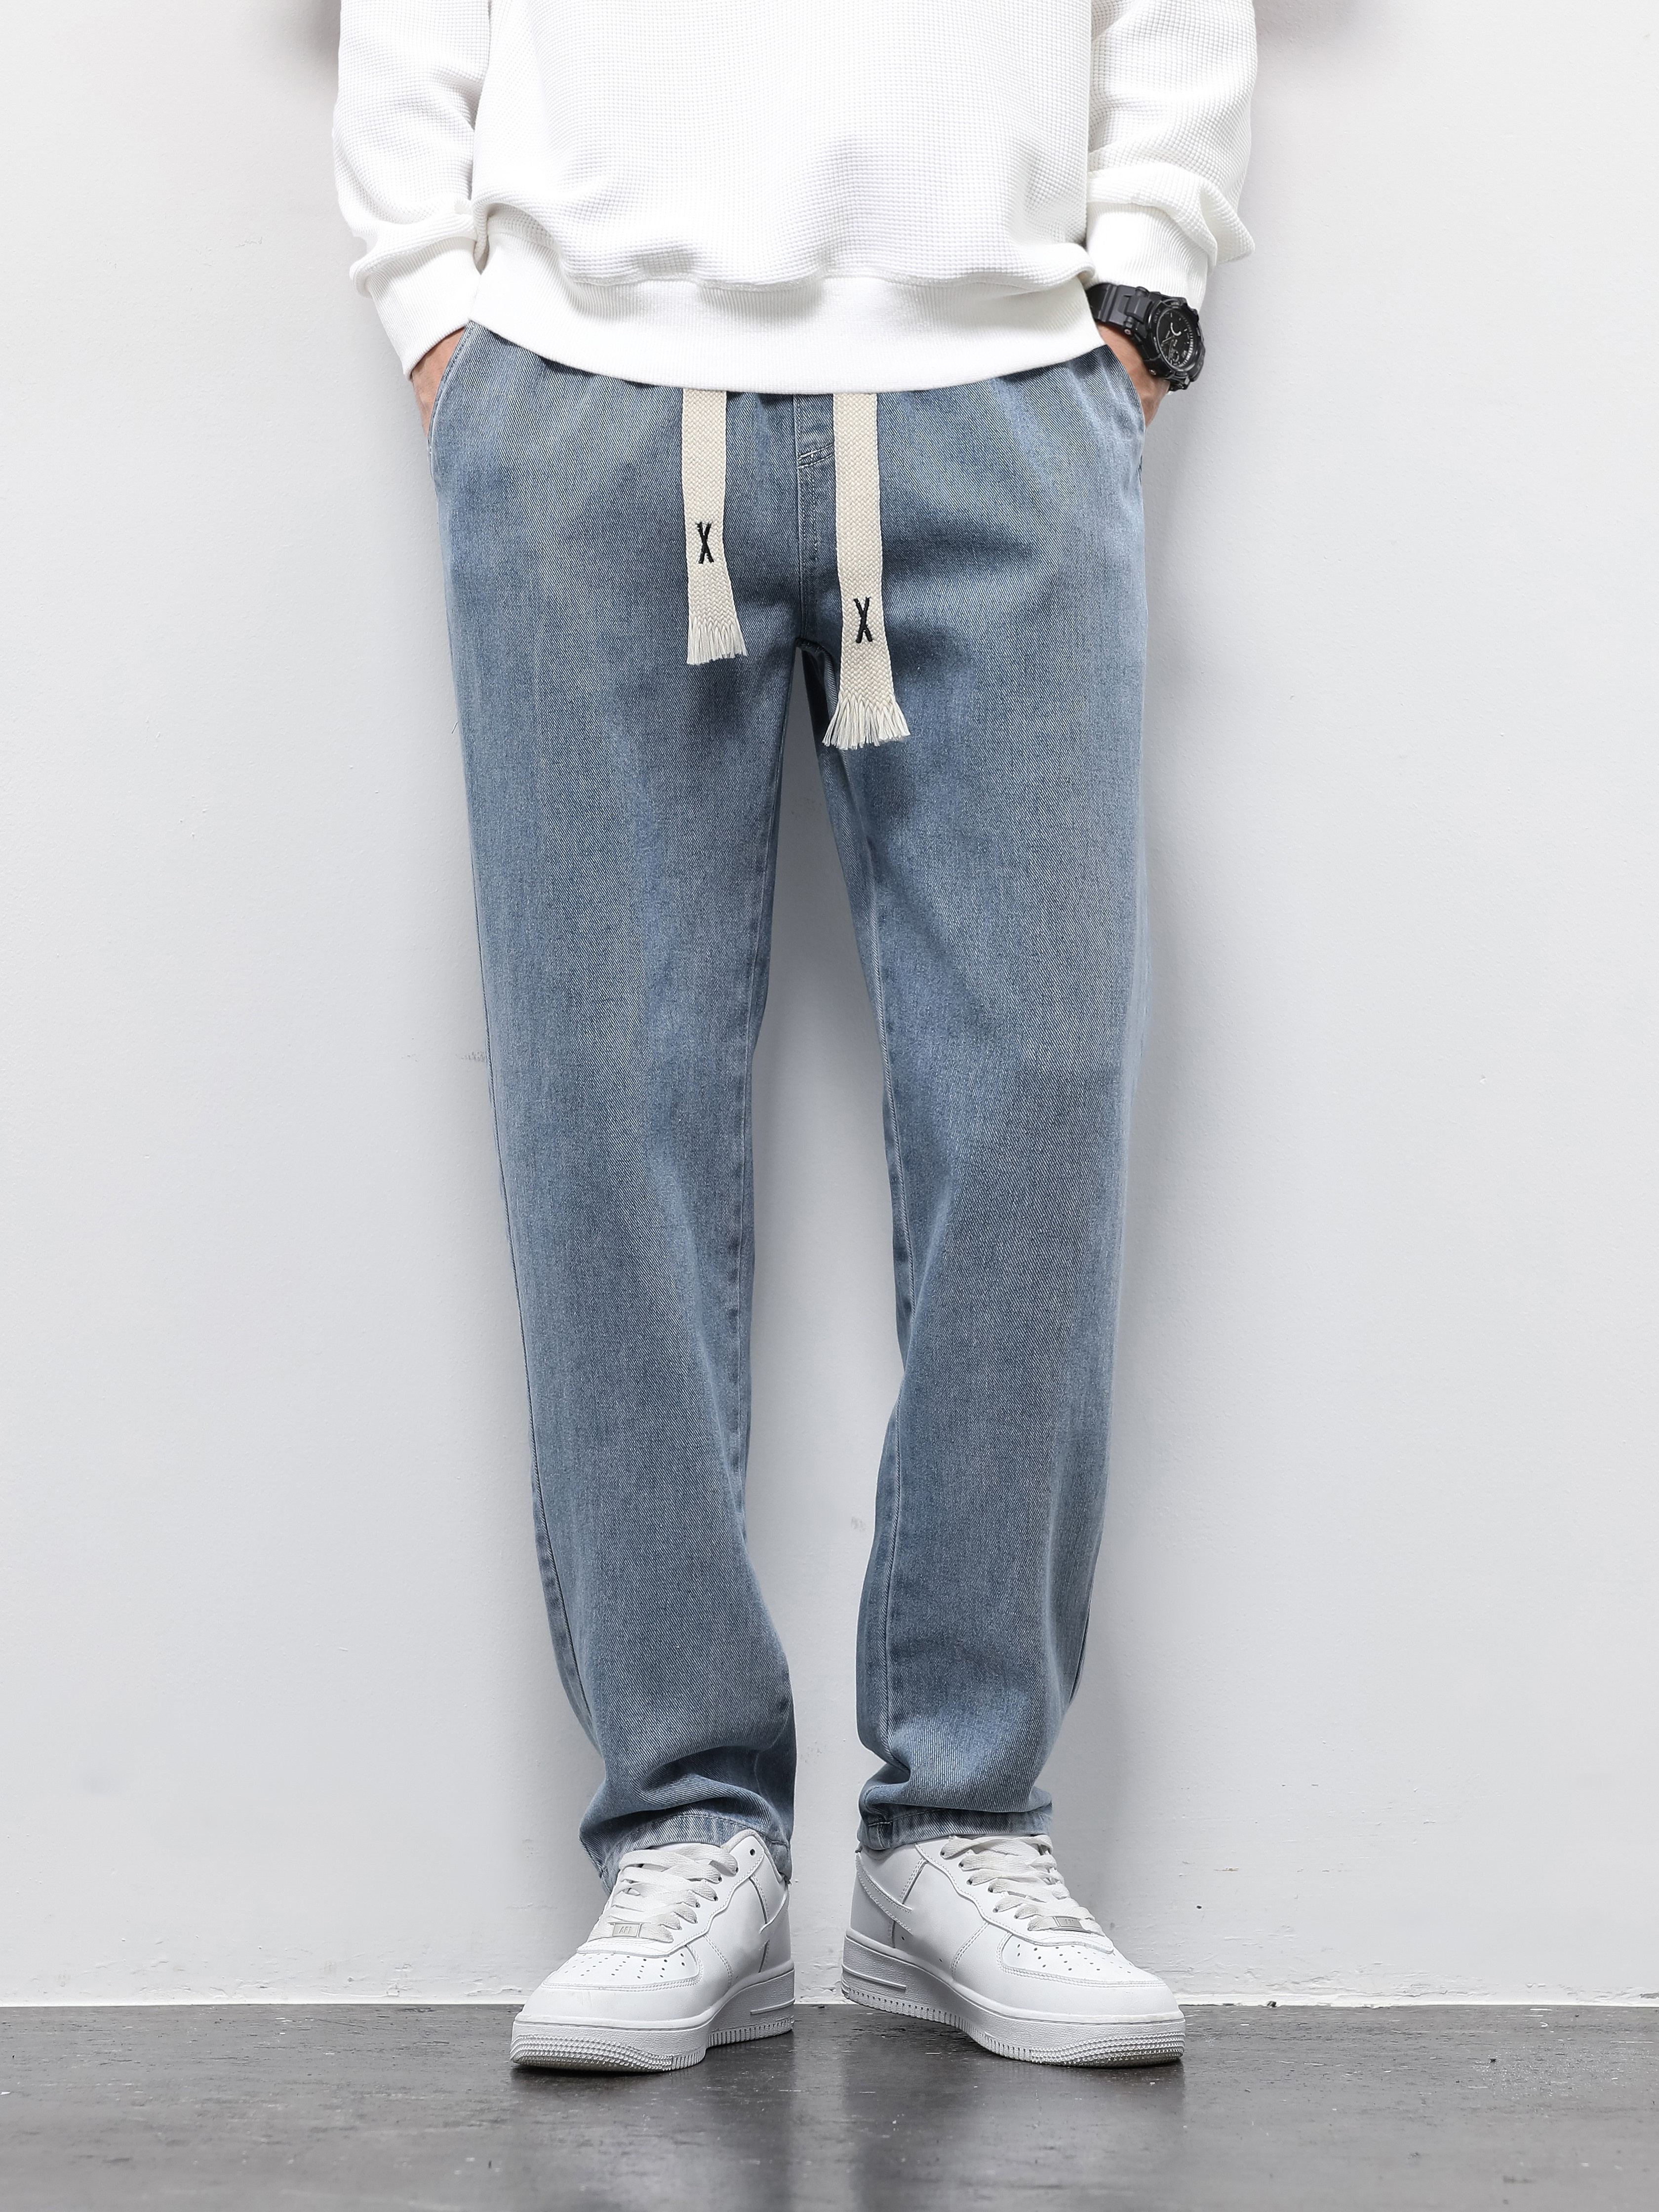 Men's Trendy Denim Jeans, Casual Straight Leg Loose Pants For Outdoor